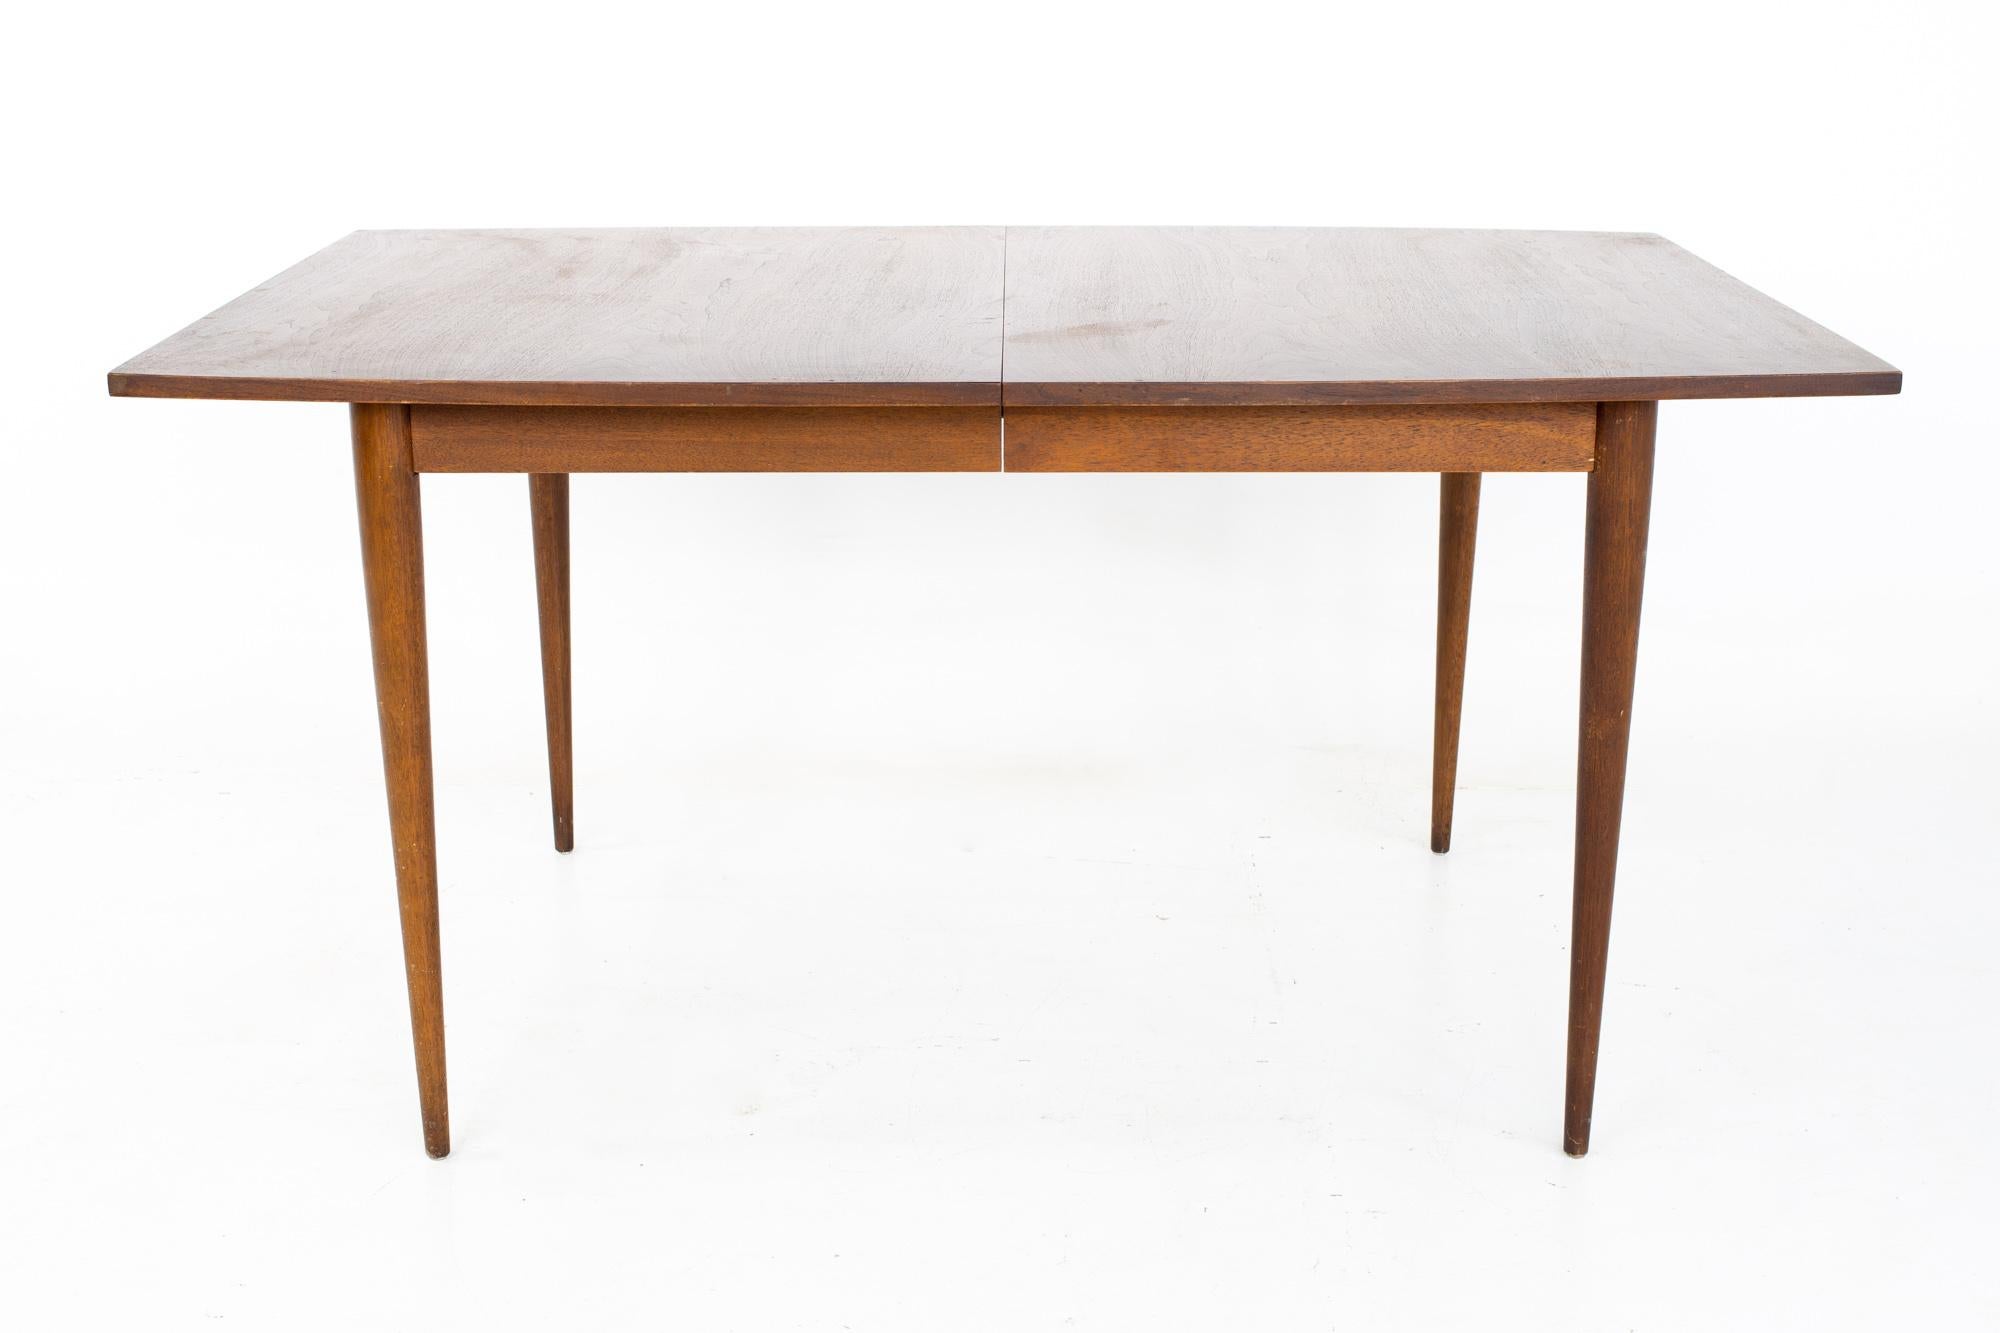 Broyhill Brasiliamid century dining table - no leaf

This table measures: 60.5 wide x 40 deep x 29.5 inches, with a chair clearance of 25.5 inches 

All pieces of furniture can be had in what we call restored vintage condition. That means the